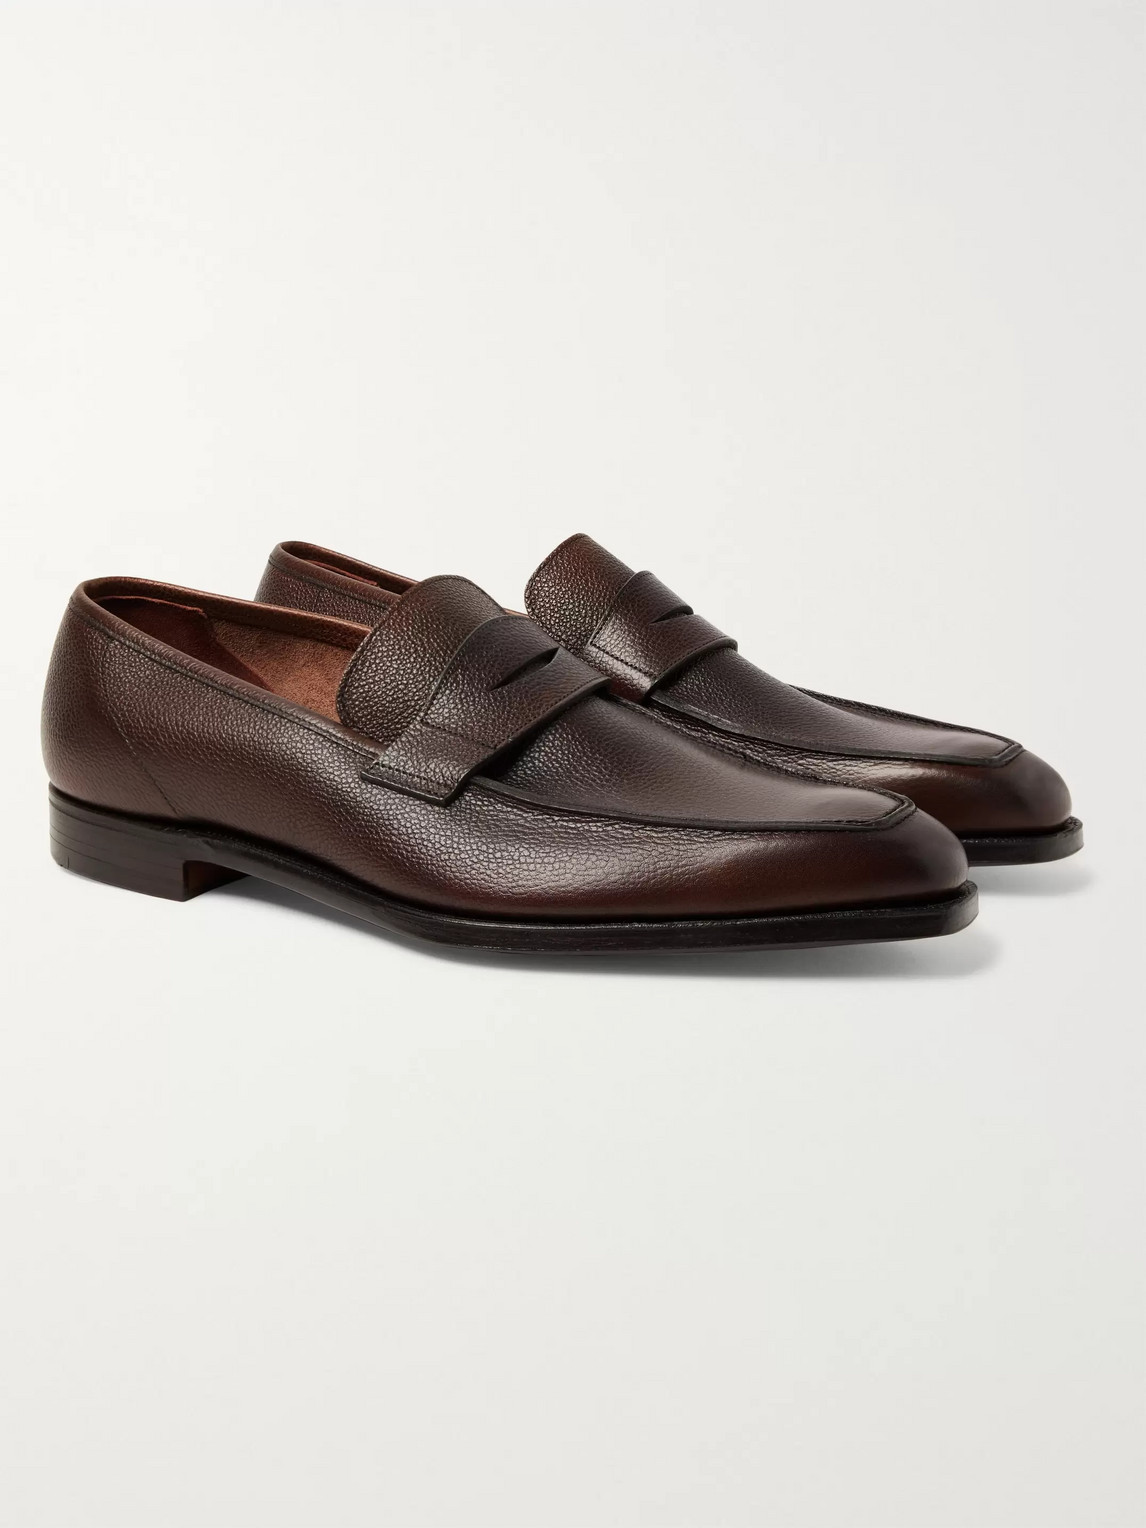 GEORGE CLEVERLEY GEORGE FULL-GRAIN LEATHER PENNY LOAFERS